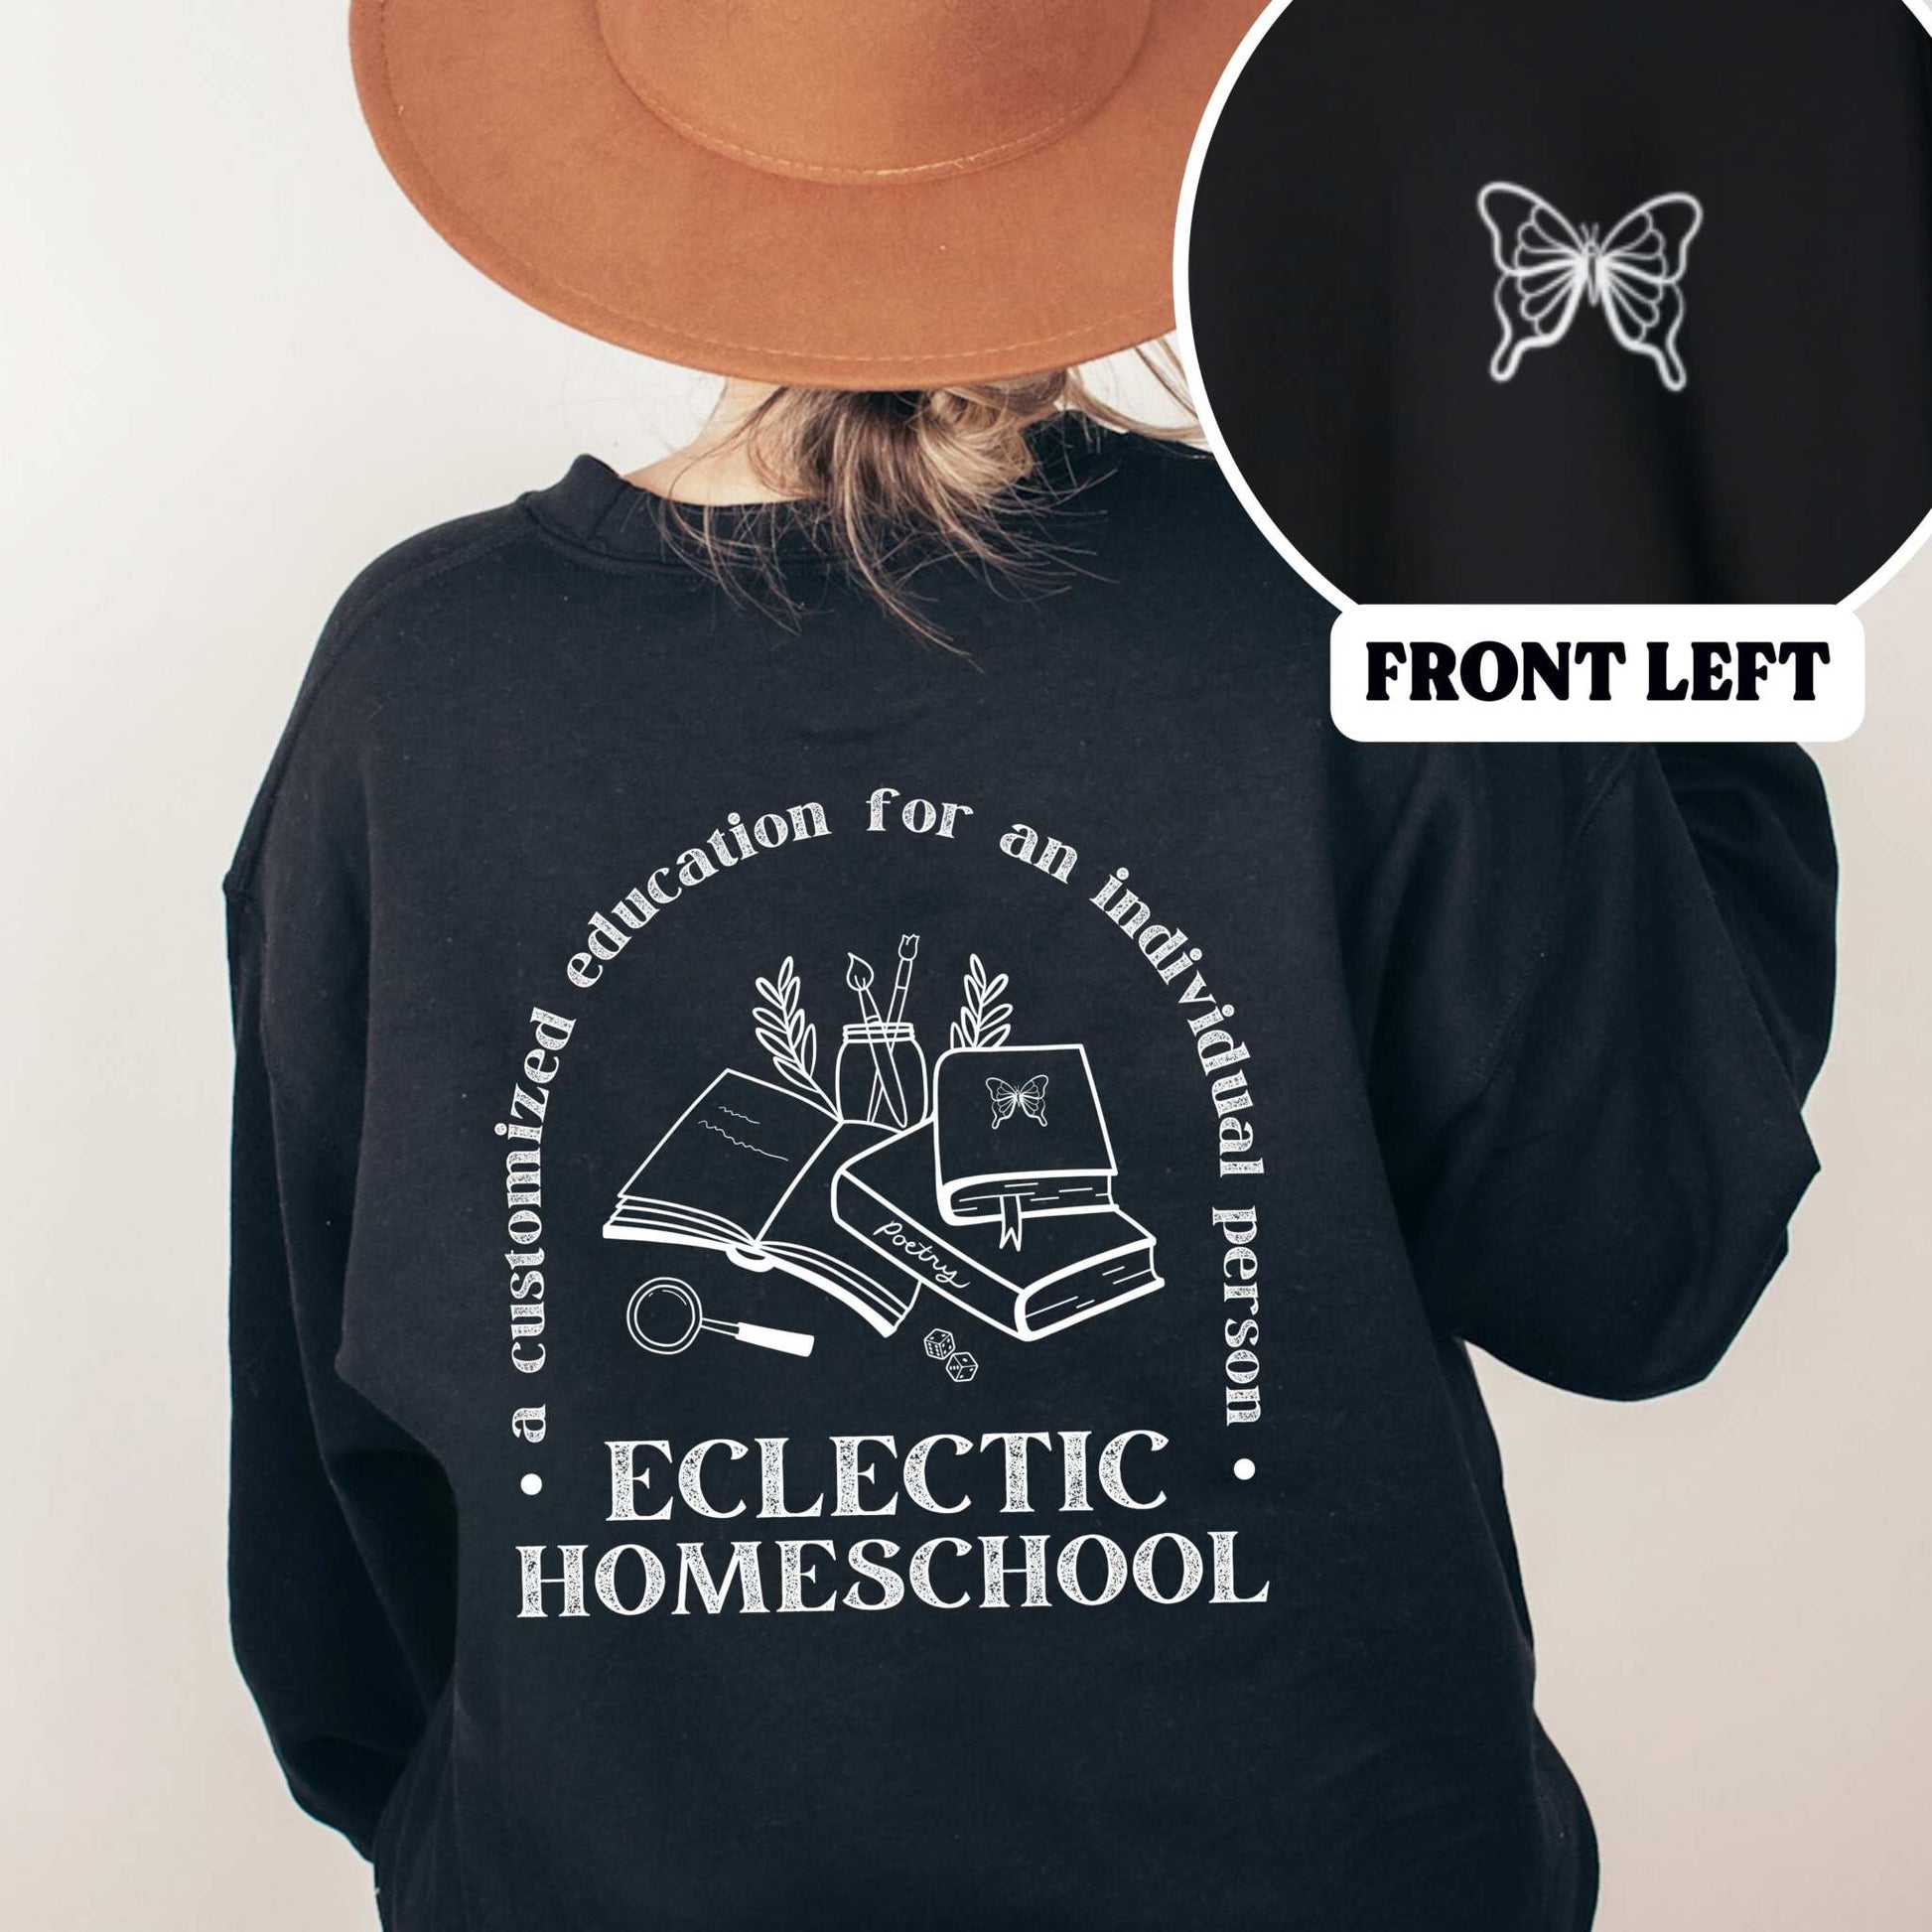 Eclectic Homeschool Crewneck SweatshirtWolfe Paw DesignsEclectic Homeschool Crewneck SweatshirtFinally, a sweater for the eclectic homeschool moms!
A customized education for an individual person 
Also in a Tee Shirt: Click Here
&amp; Hoodie: Click Here
50% coEclectic Homeschool Crewneck Sweatshirt for moms